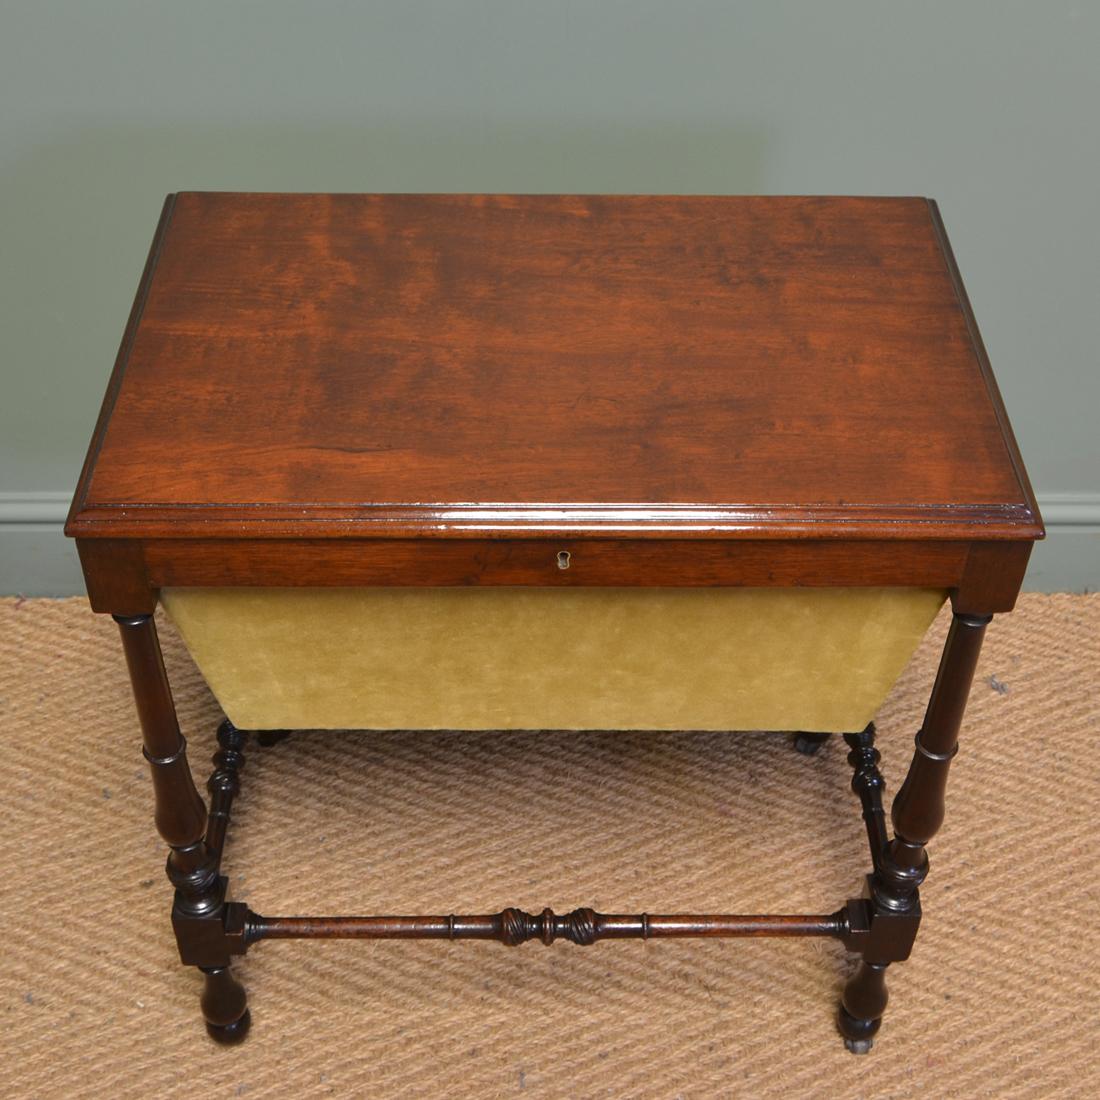 Early 20th Century Small 19th Century Edwardian Mahogany Antique Work Box, Side Table For Sale